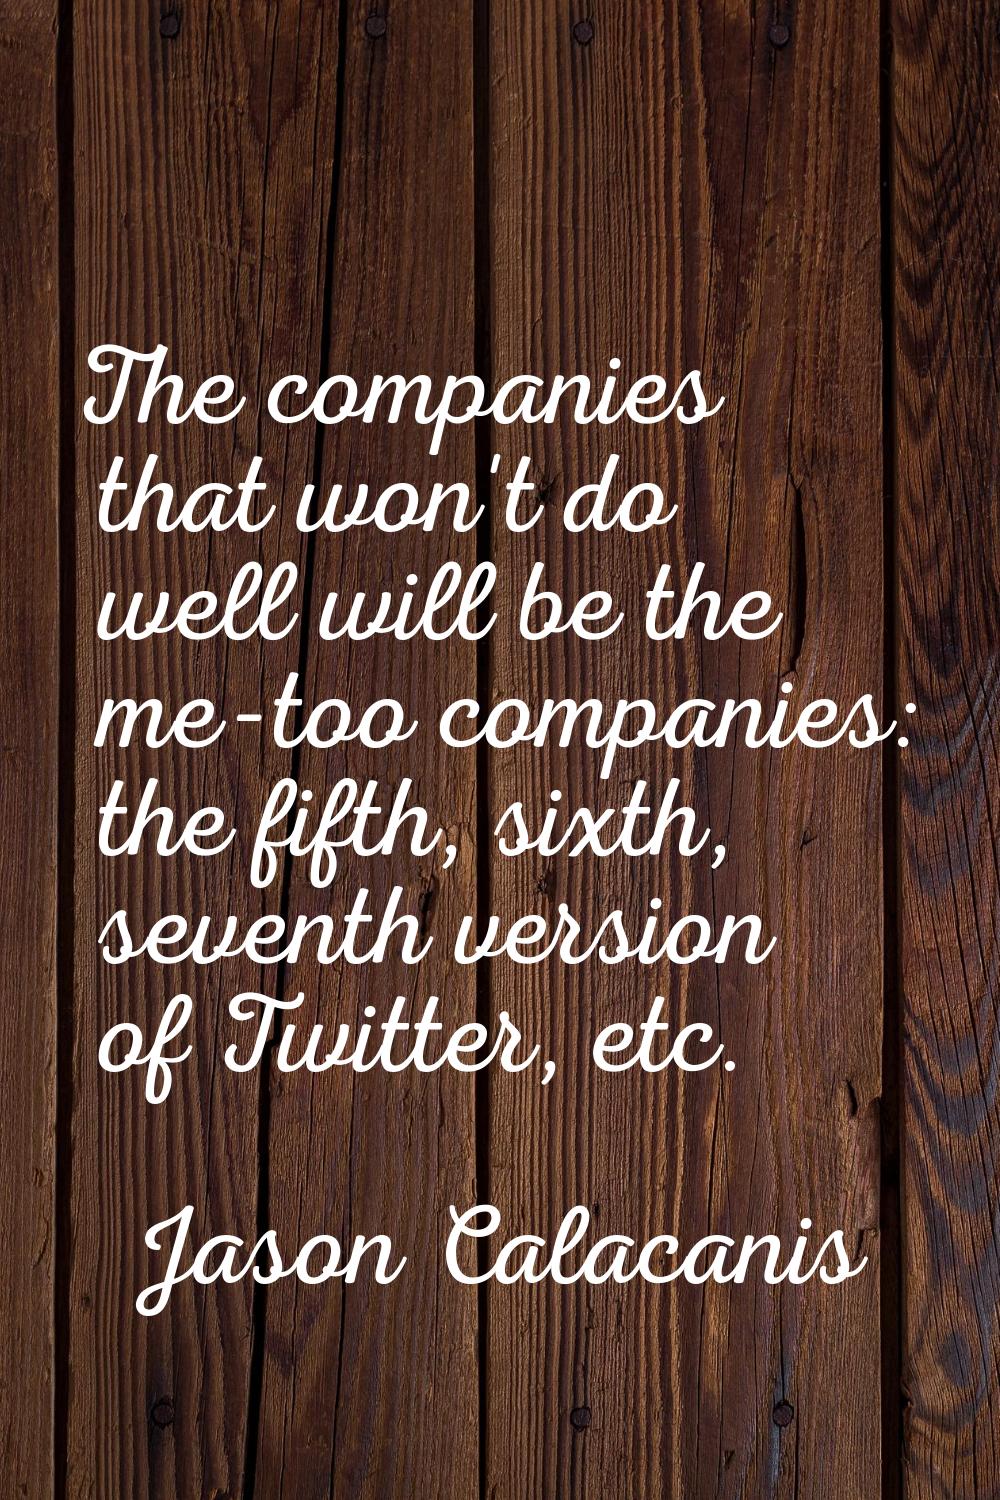 The companies that won't do well will be the me-too companies: the fifth, sixth, seventh version of